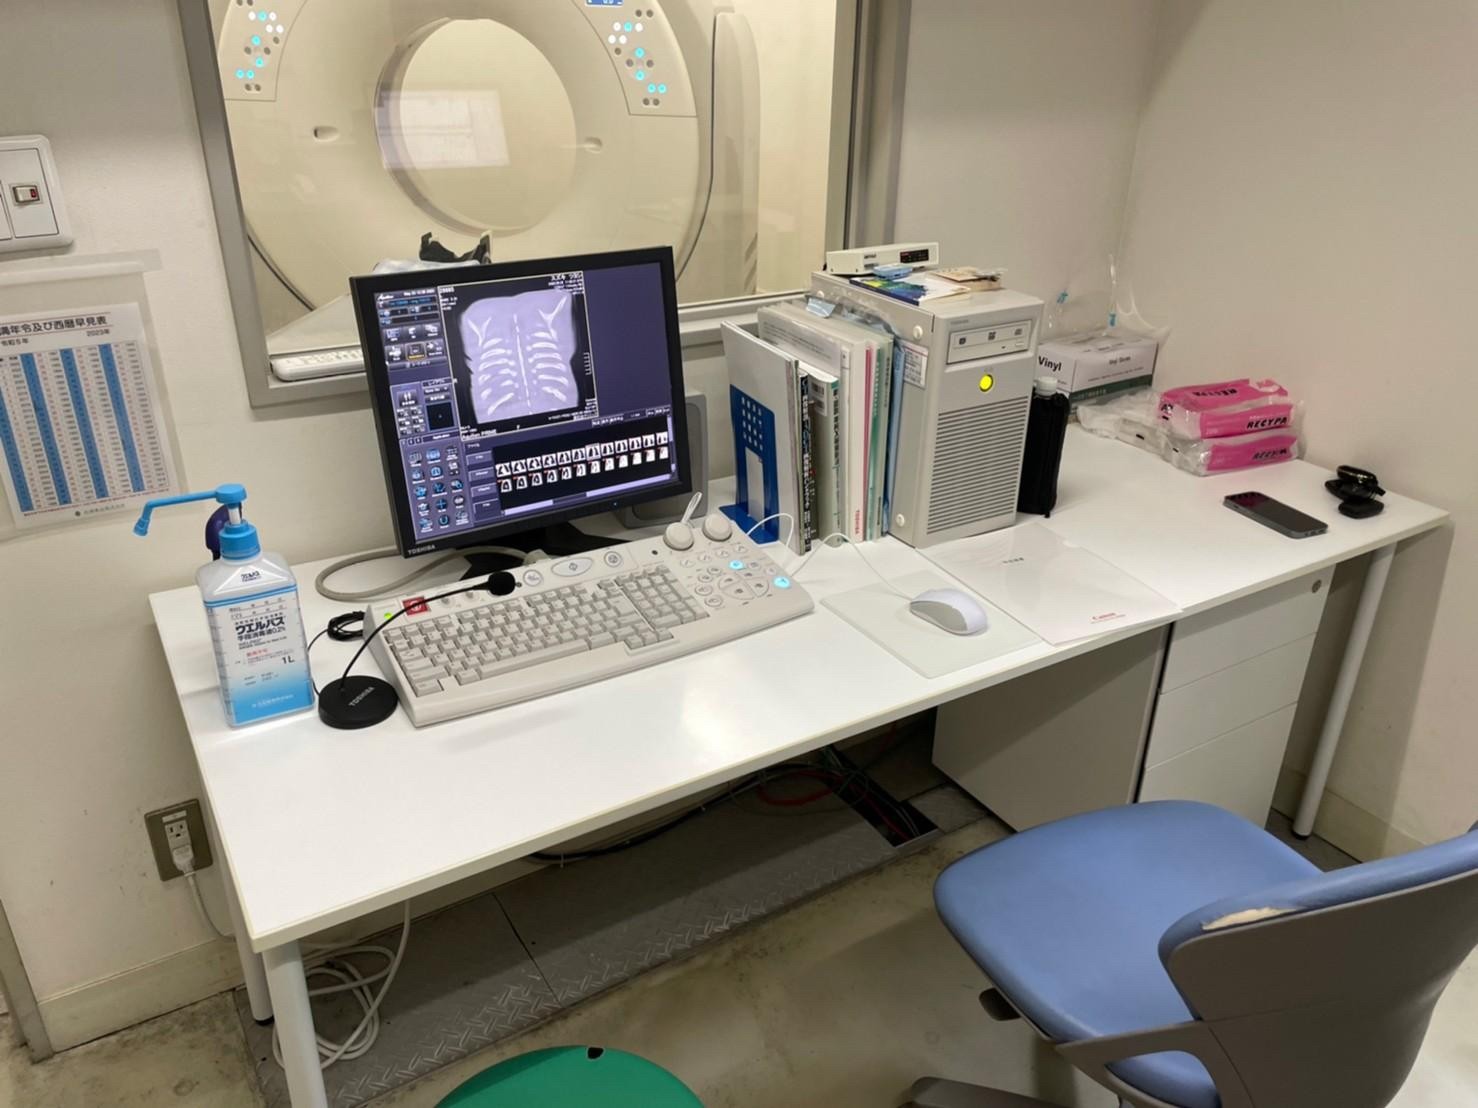 20Med CT Scan TOSHIBA MEDICAL SYSTEMS Aquilion Prime